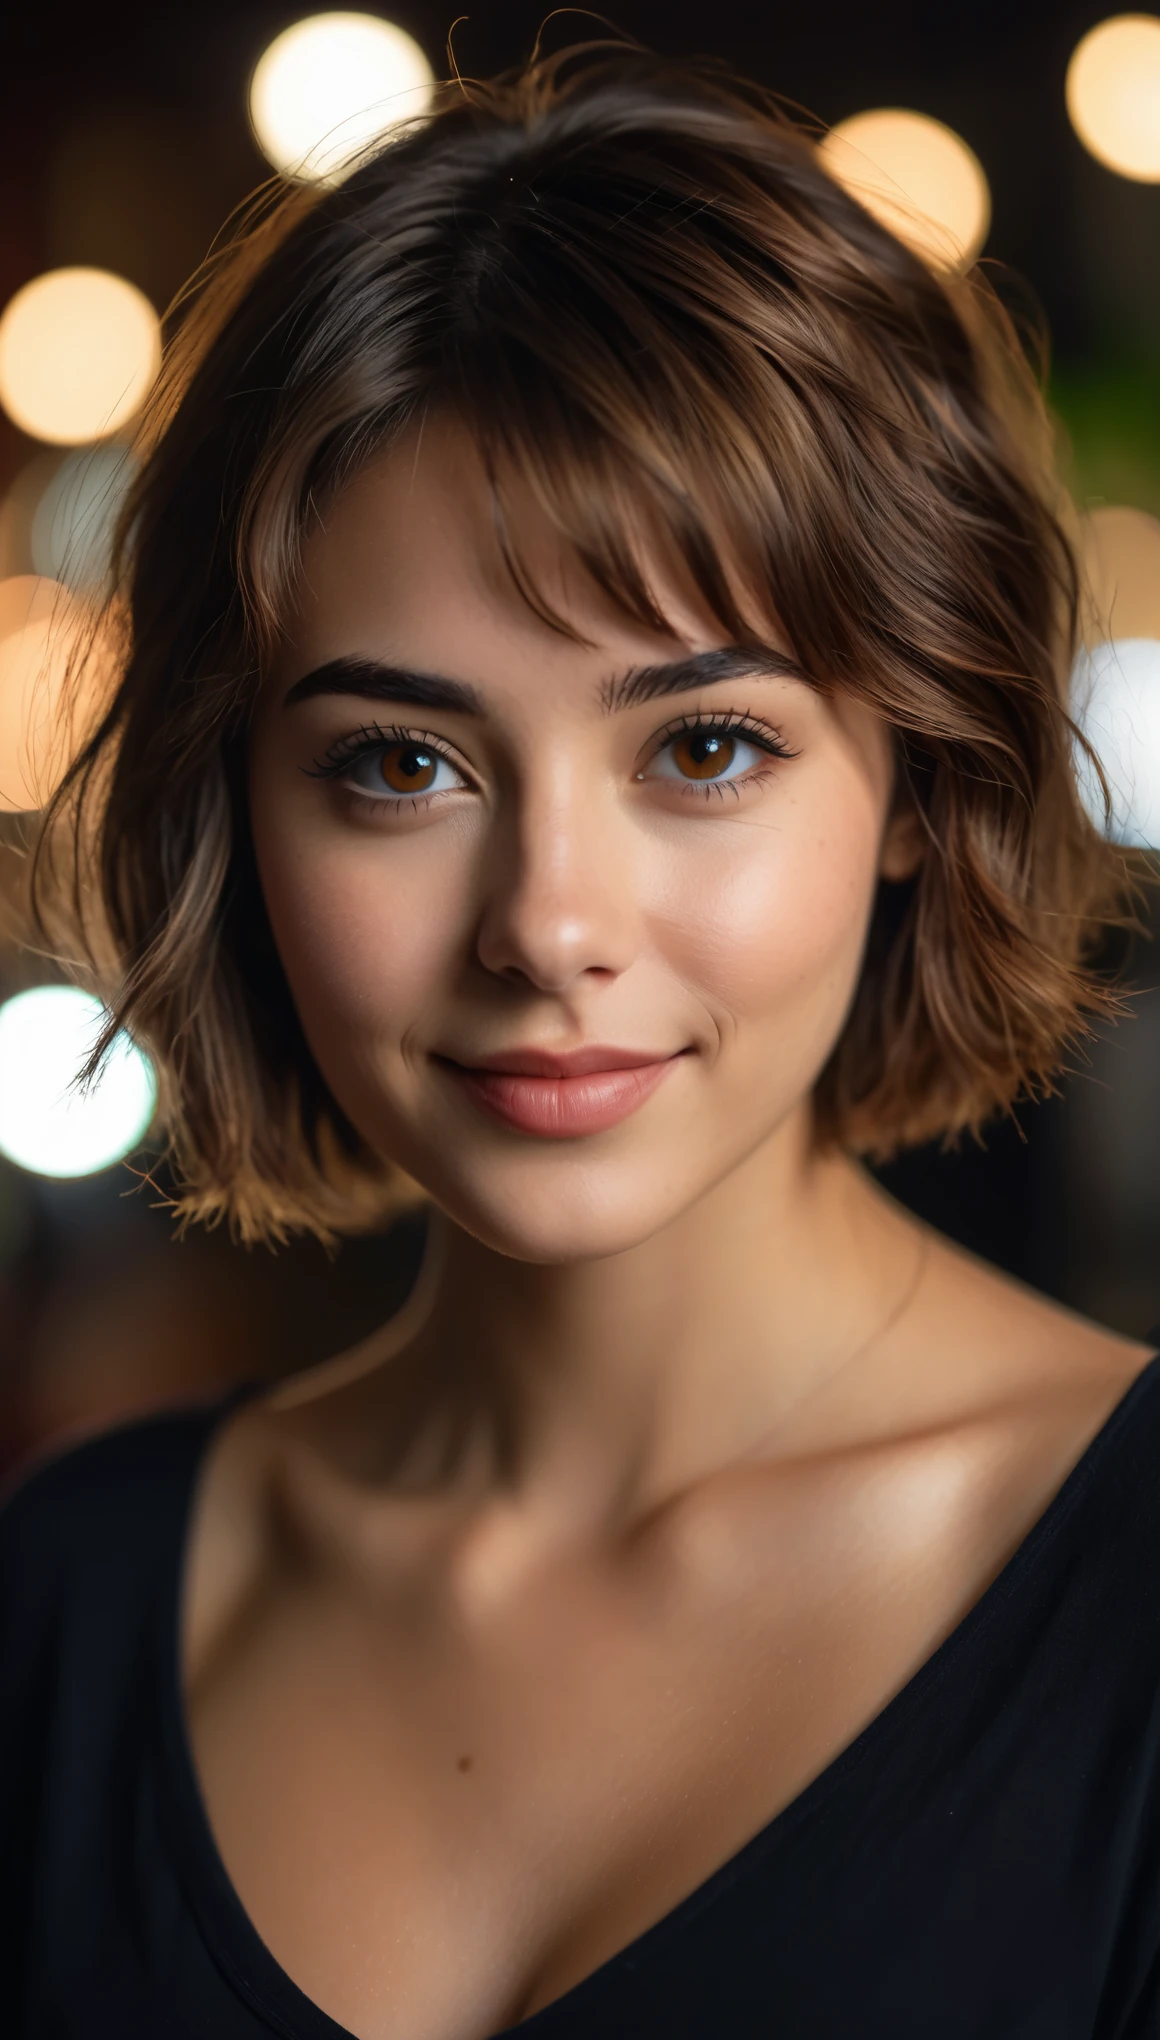 Night, RAW Photography, (((Very Beautiful Portrait))), (Very Beautiful Portrait))), 1 Girl, Sexy 25 Year Old Girl, ((Natural Brown Hair with Short Cuts)), [Brown Eyes],Gentle Smile Staring at the Camera(cleavage), ((Masterpiece, Best Quality, Ultra Detail, Cinematic Lights, Intricate Detail, High Definition, 8k, Very Detailed)), Detail Background, 8k UHD, DSLR, soft lighting, high quality, film grain, fujifilm XT3, shallow depth of field, natural light, perfect face